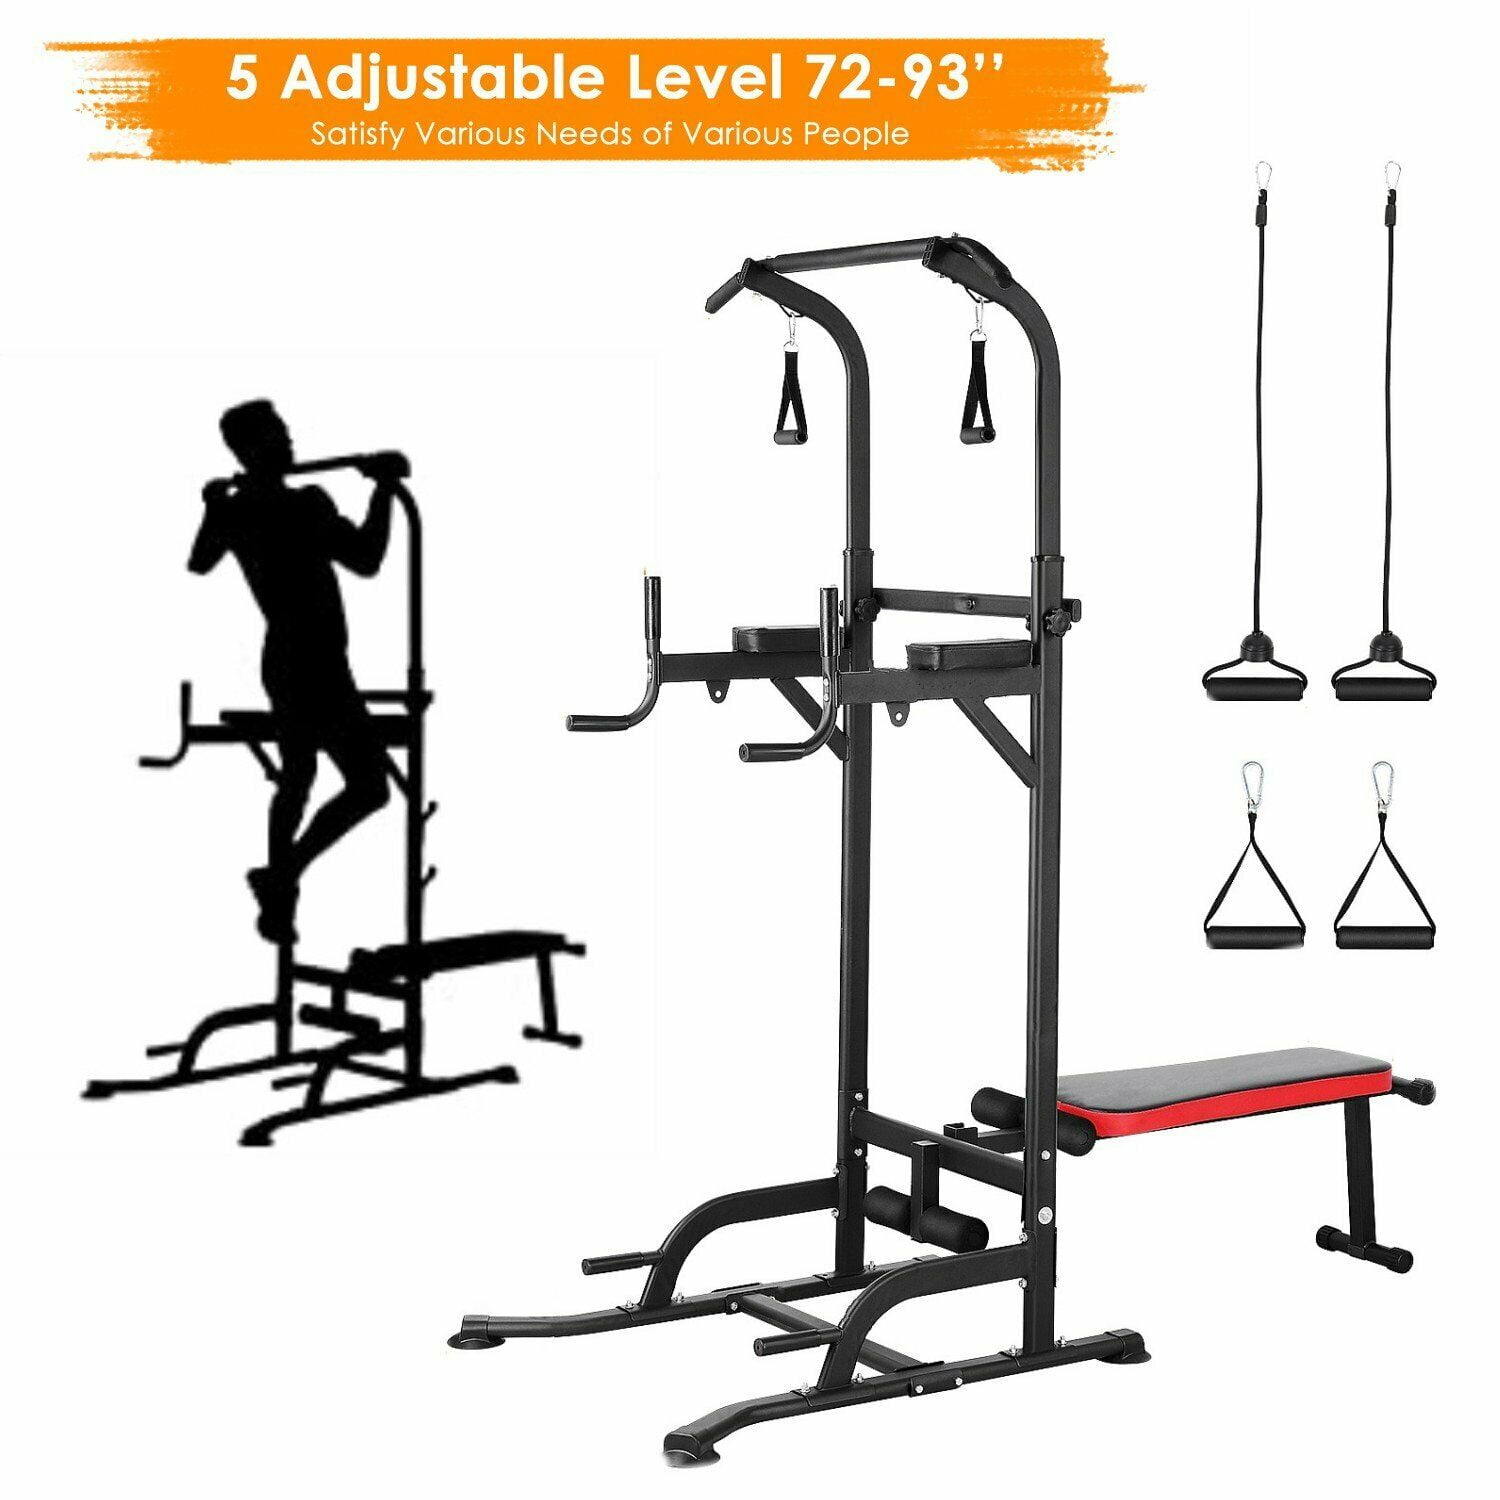 Multi-Function Power Tower W/ Bench Sit Up Workout Station Equipment Home Gym UK 